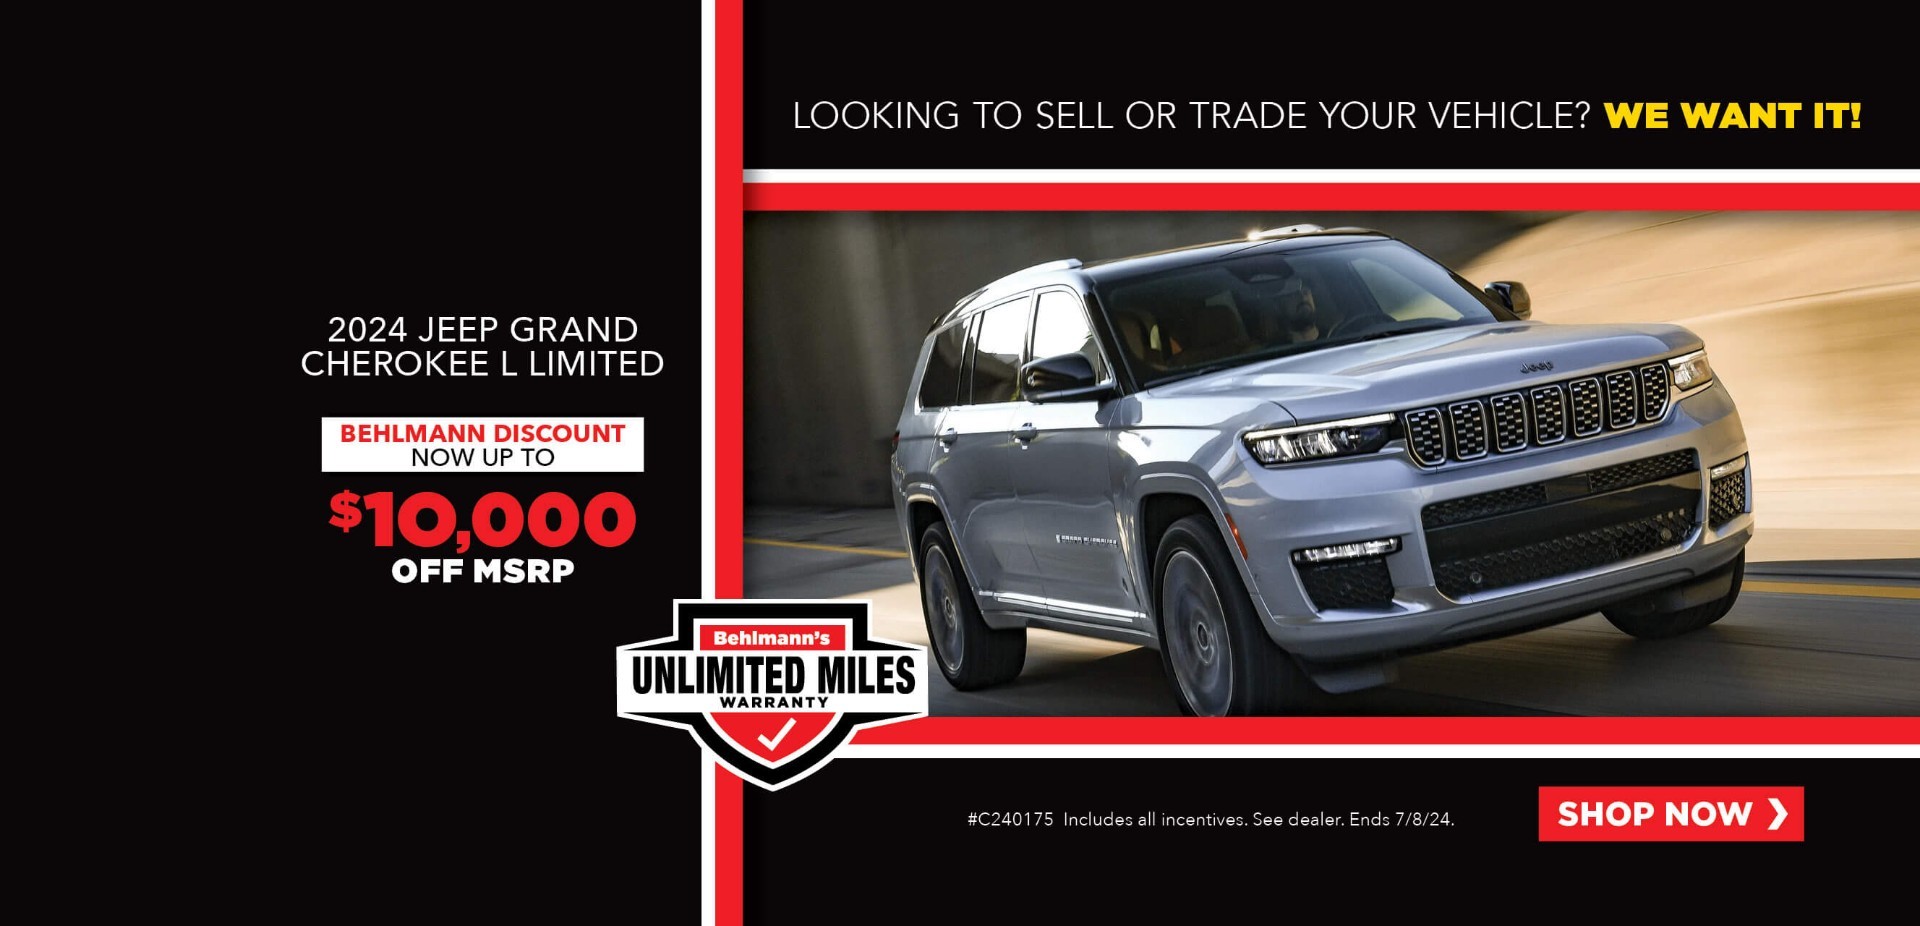 Gray SUV with advertising slogans: Behlmann Discount - Now up to $10,000 off MSRP on 2024 Jeep Grand Cherokee L Limited.